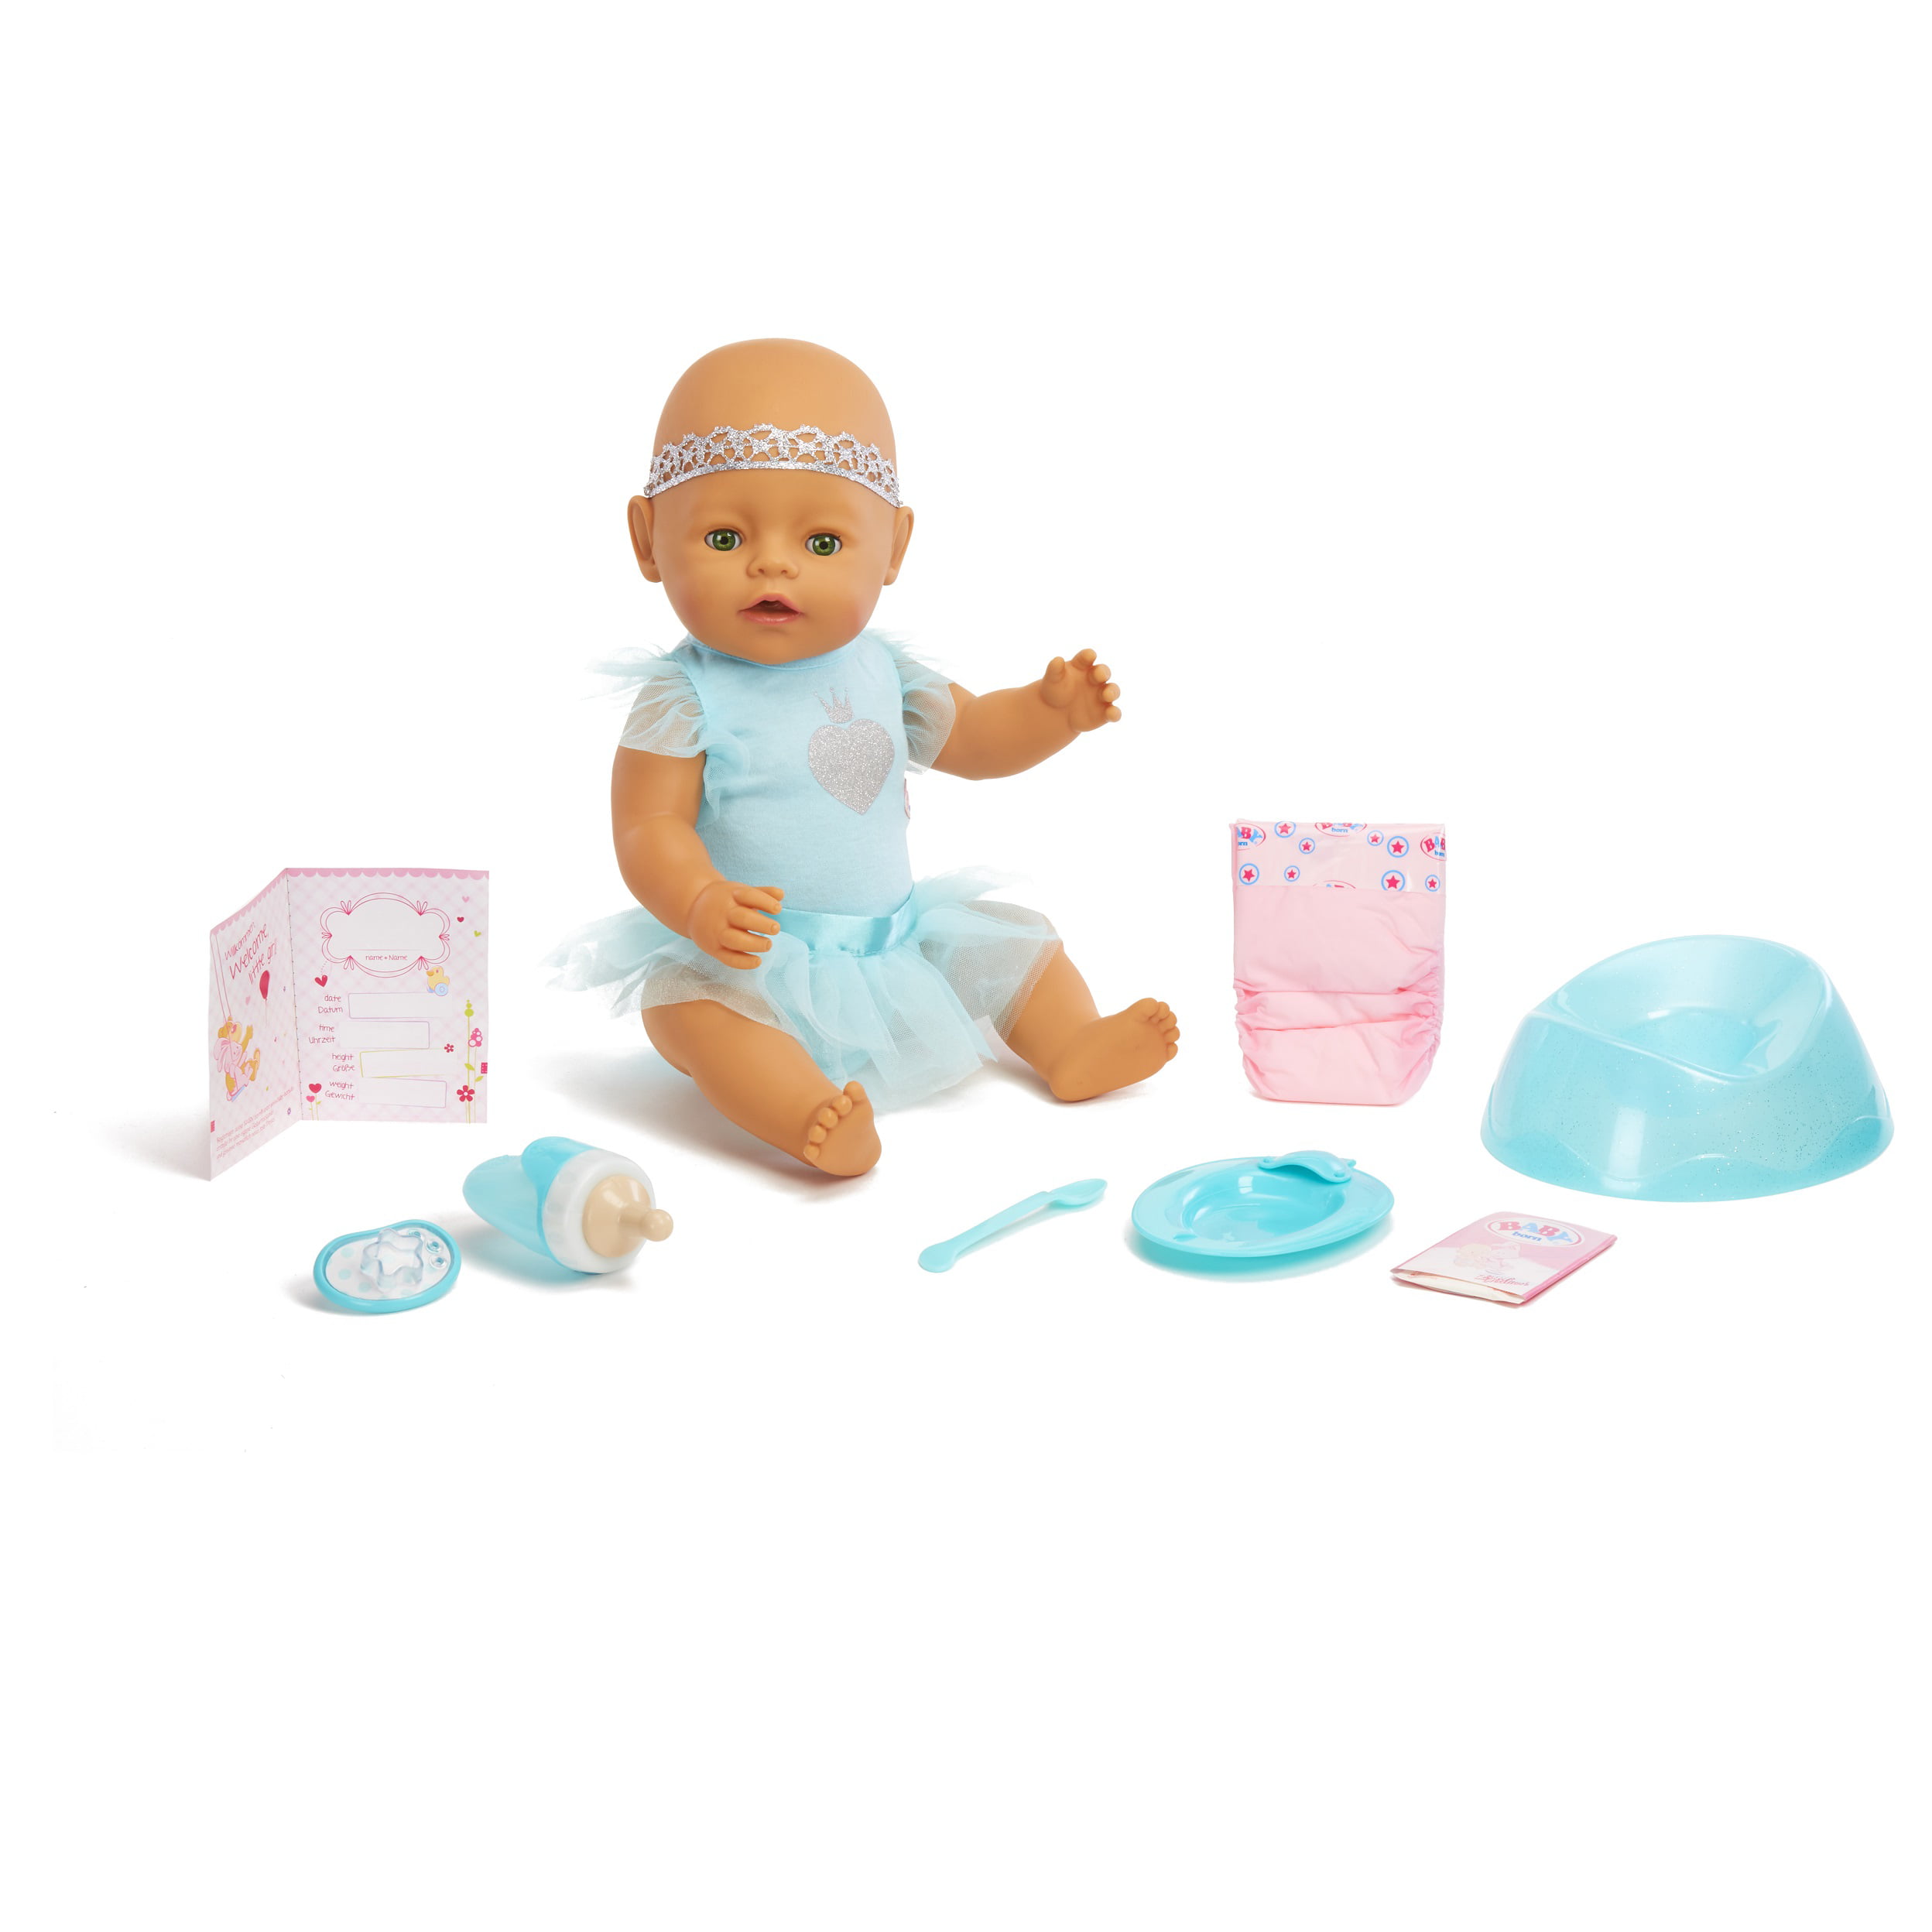 Brown Eyes With 9 Ways To Nu Baby Born Interactive Boy Baby Doll Party Theme 